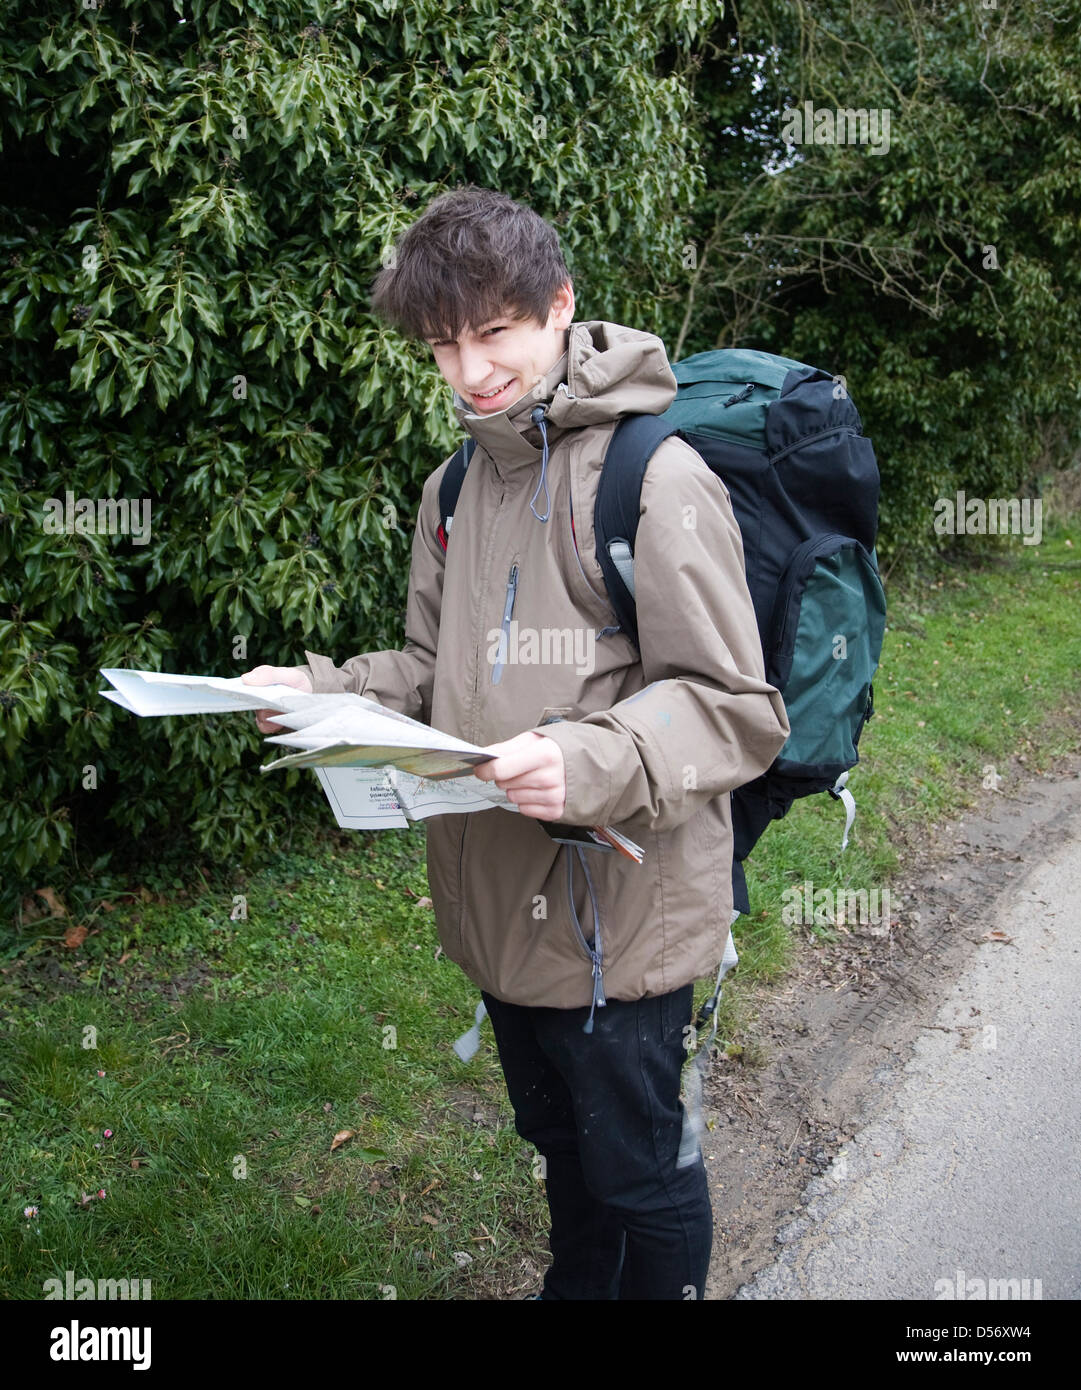 Model released young man hiker map reading Stock Photo